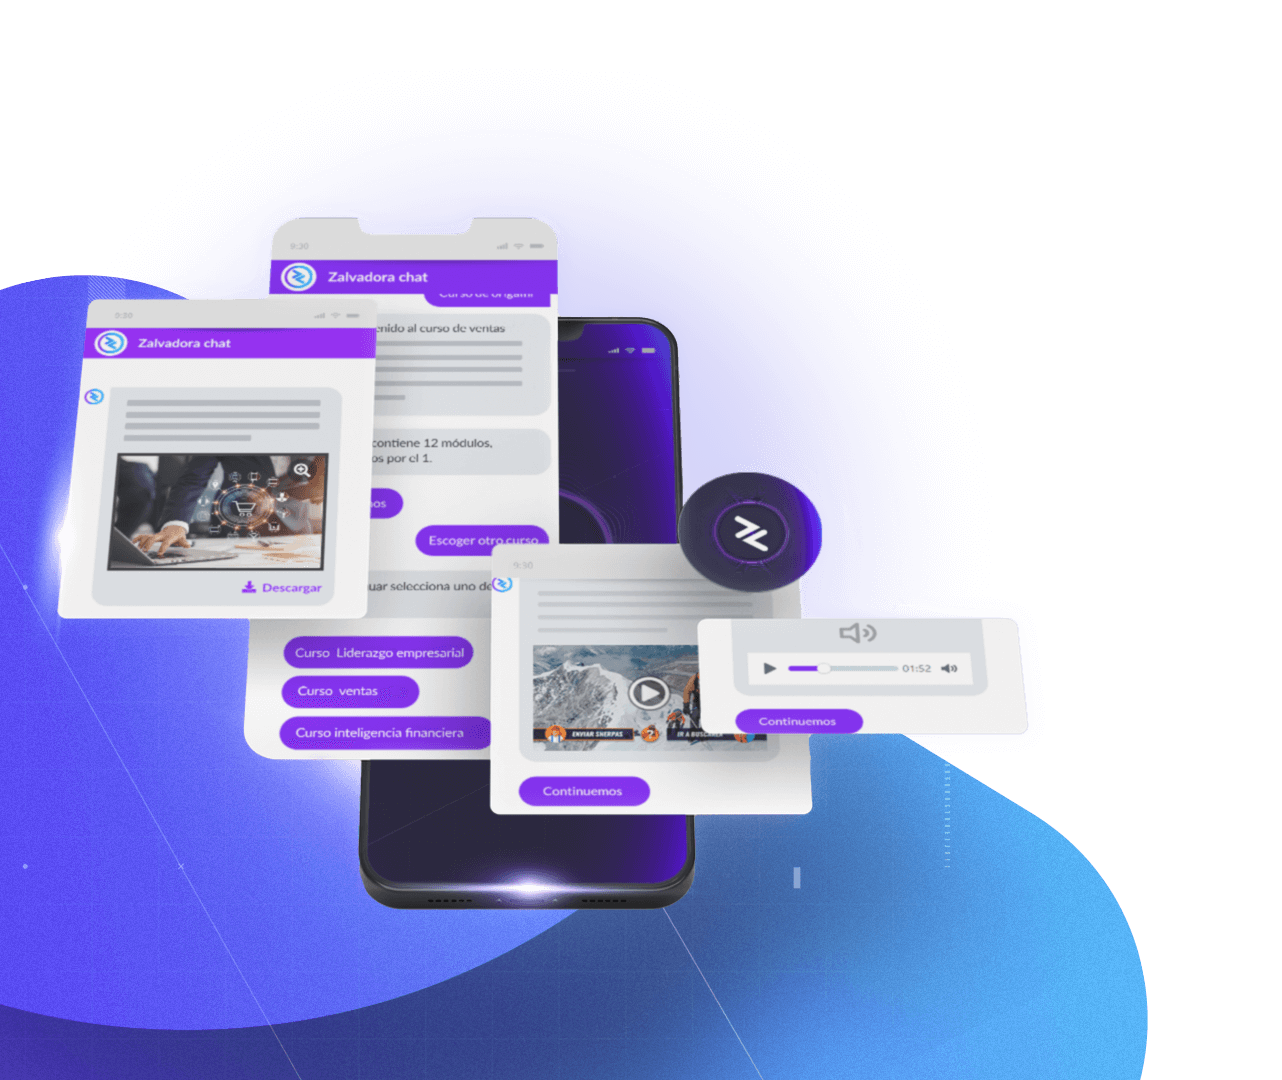 Discover Zeta and train your collaborators through a new chat for business training. We turn an everyday communication tool into a revolutionary training strategy.